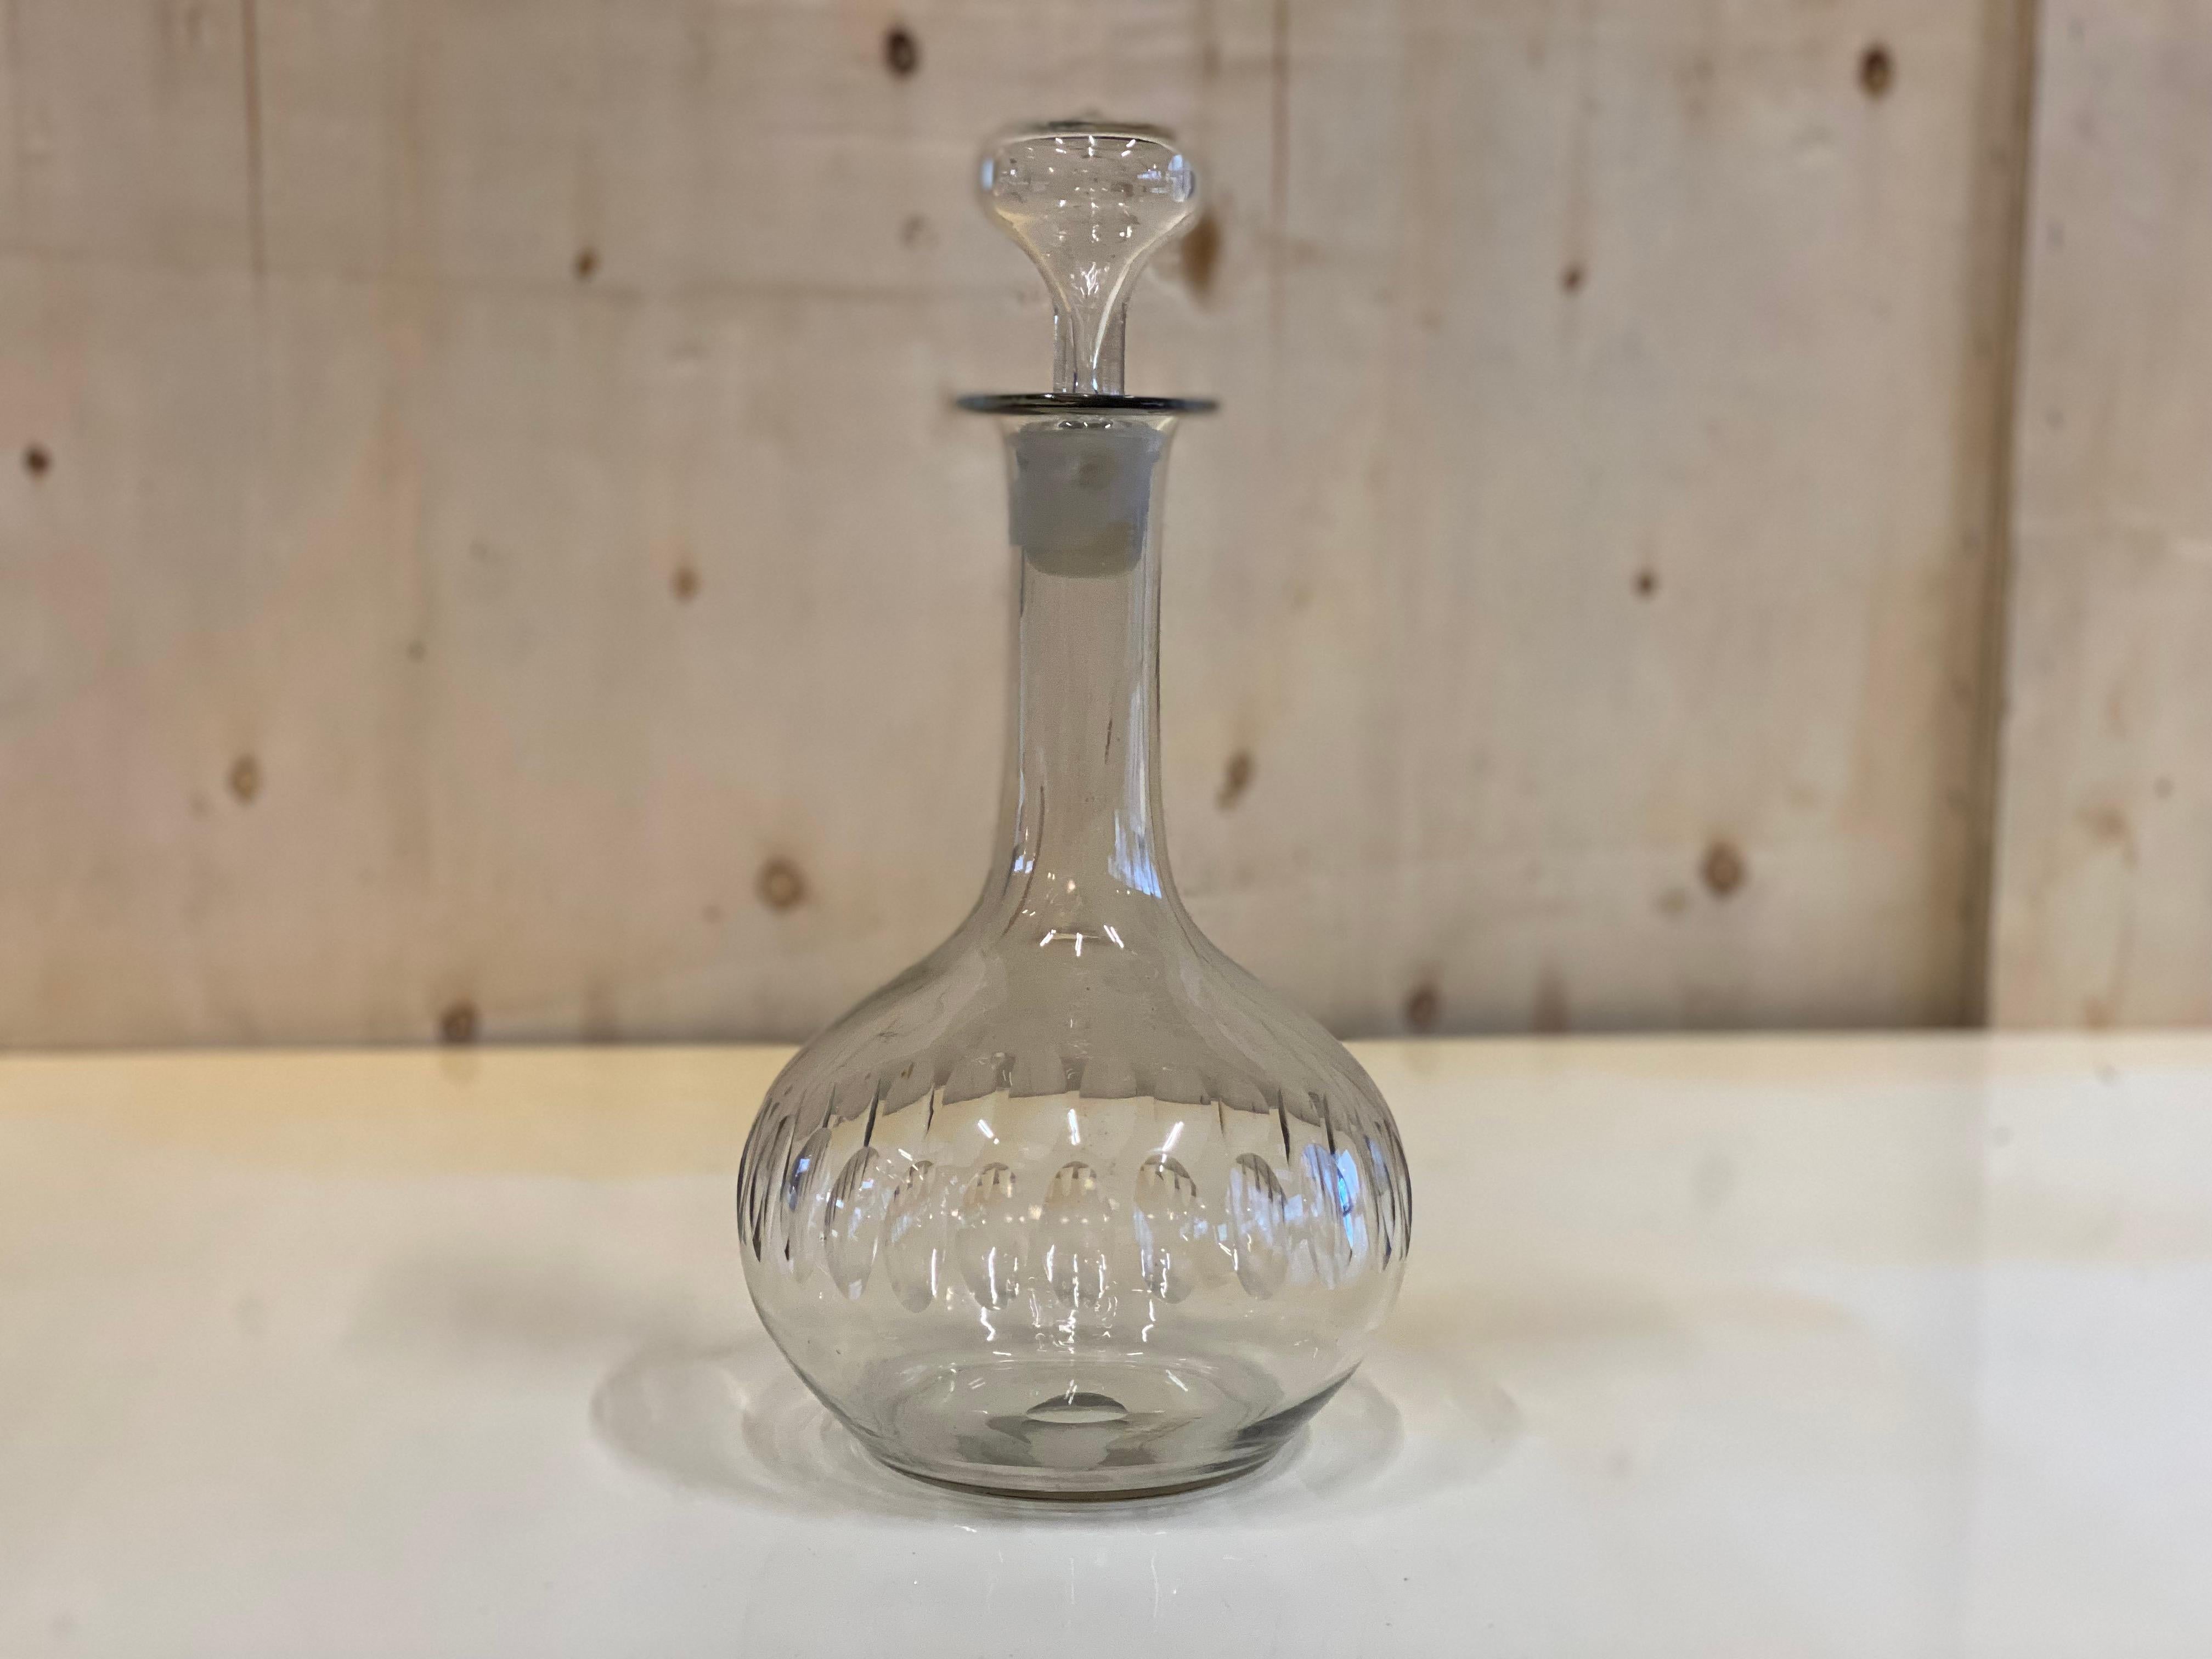 Antique stopper carafe from France from the years around 1900. The carafe has a bulbous body and opens into a narrow neck, which is closed by a stopper. The special feature of the carafe is on the one hand the glass stopper with air inclusion and